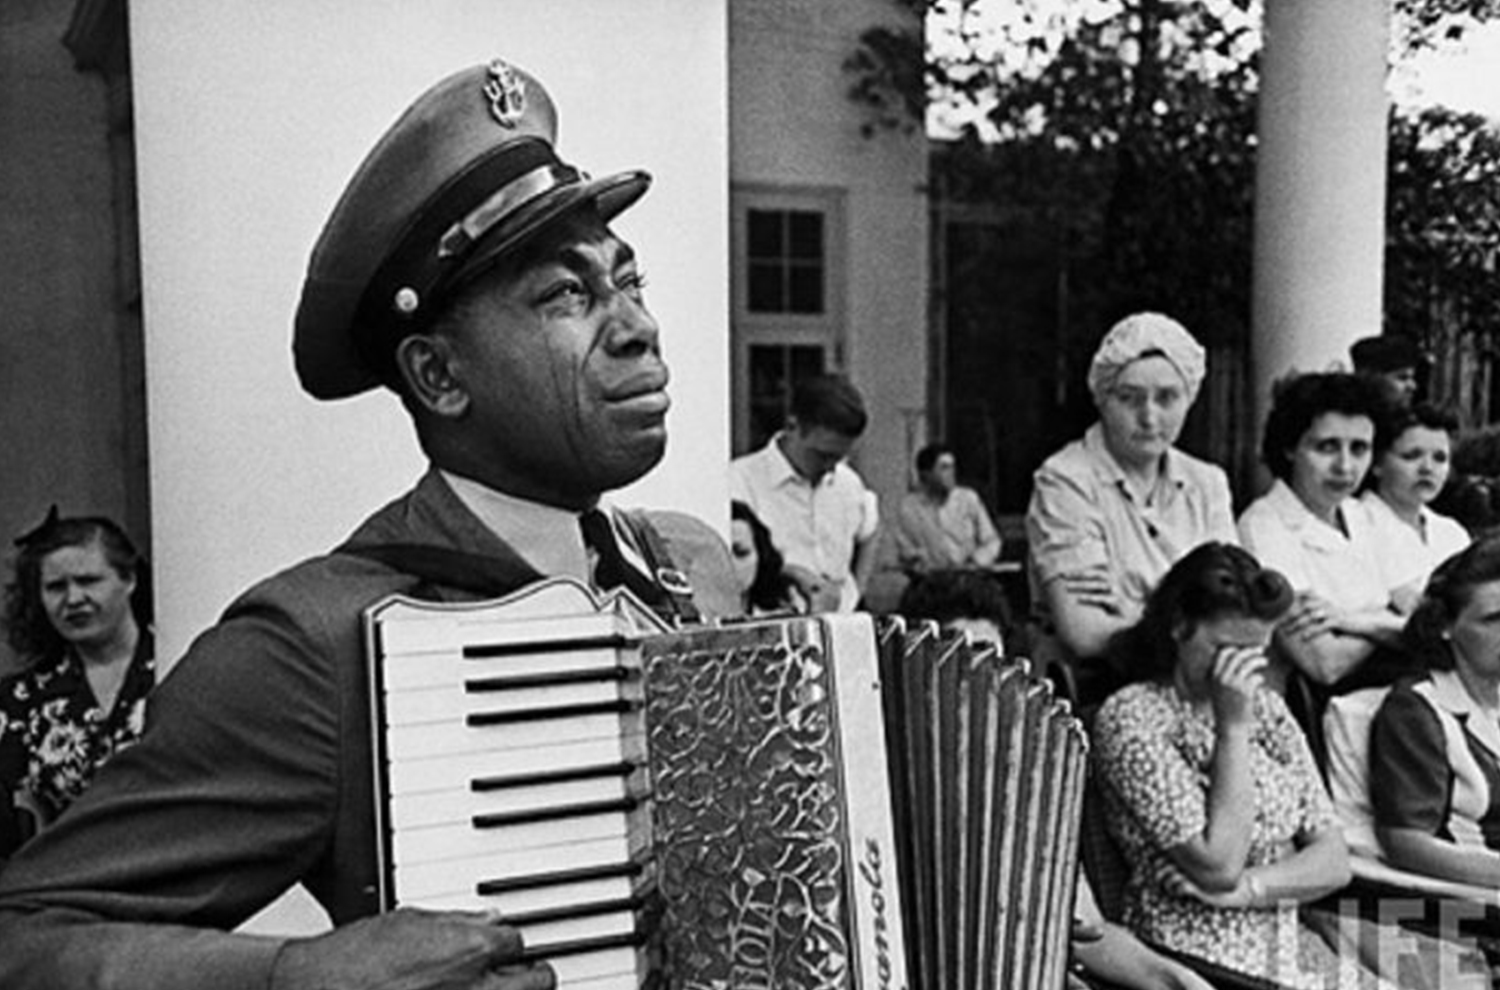 Famous photo of a man playing an instrument and crying